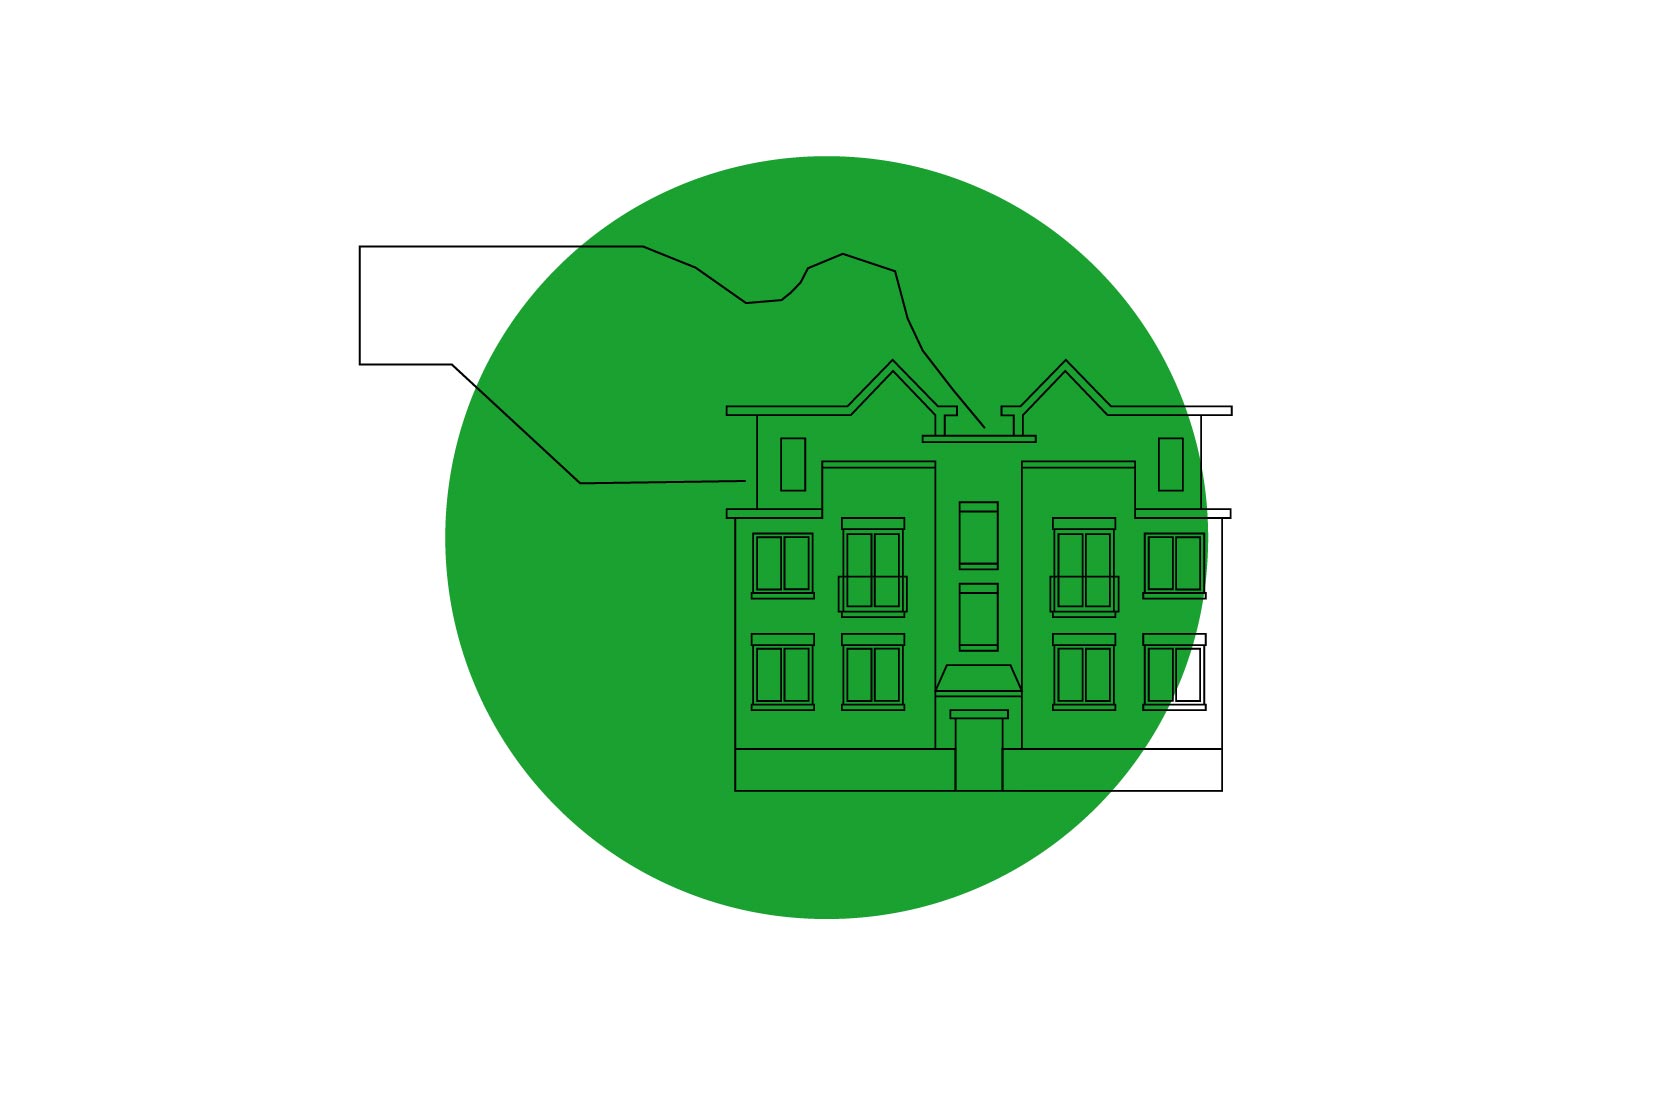 Illustration of Albany Park Home and Neighborhood